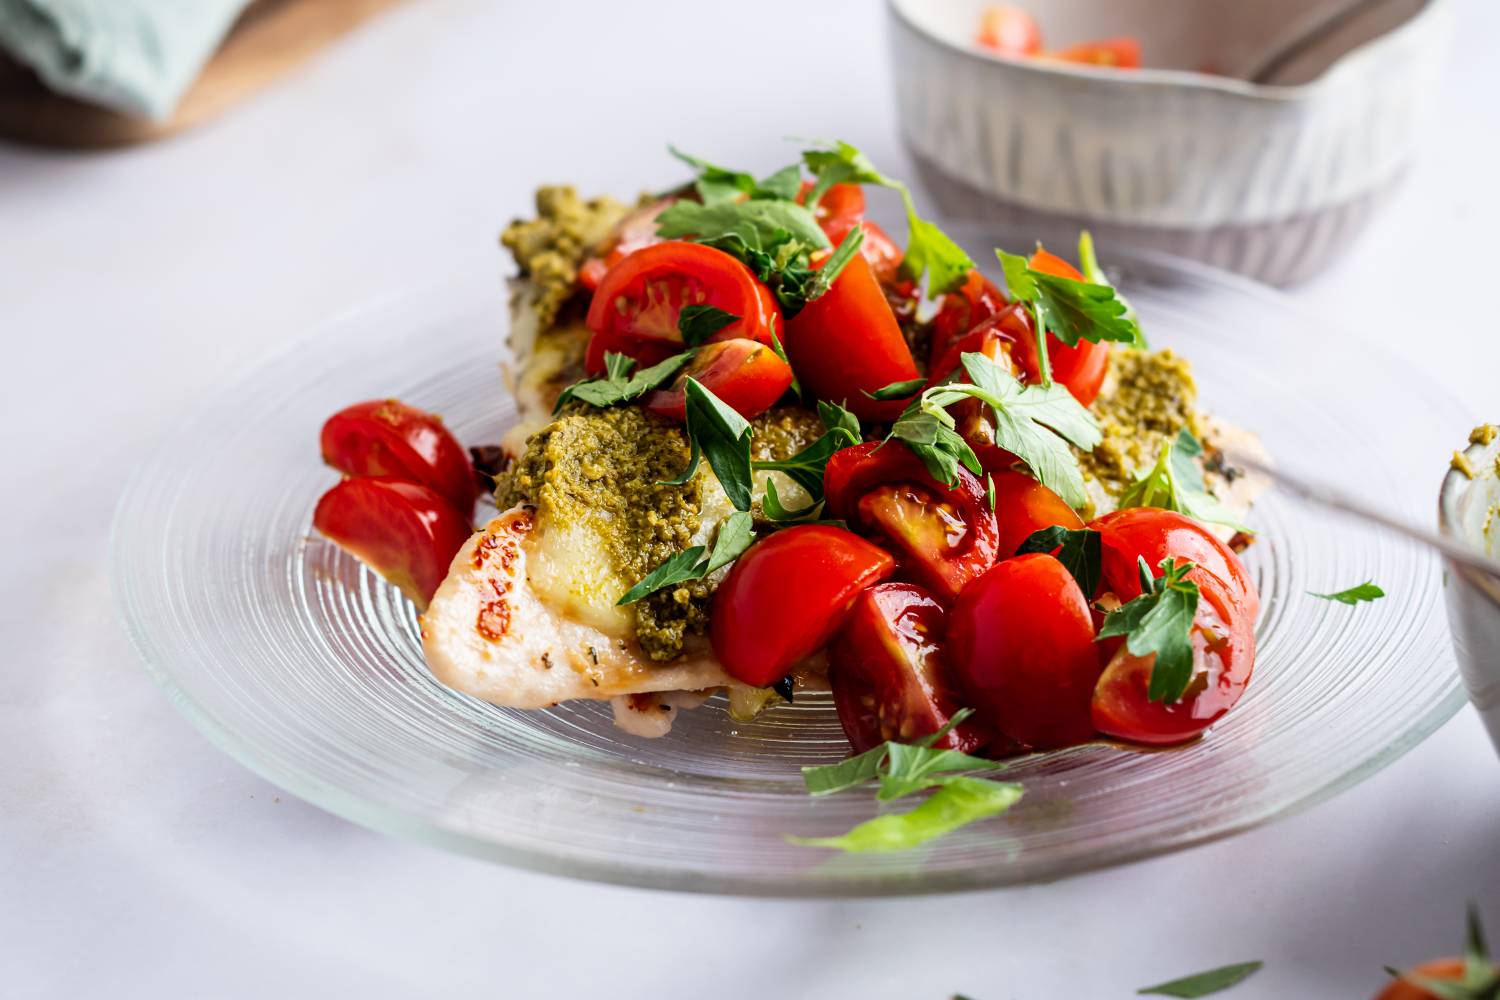 Grilled chicken margherita with cherry tomatoes, melted mozzarella cheese, and pesto on a plate.